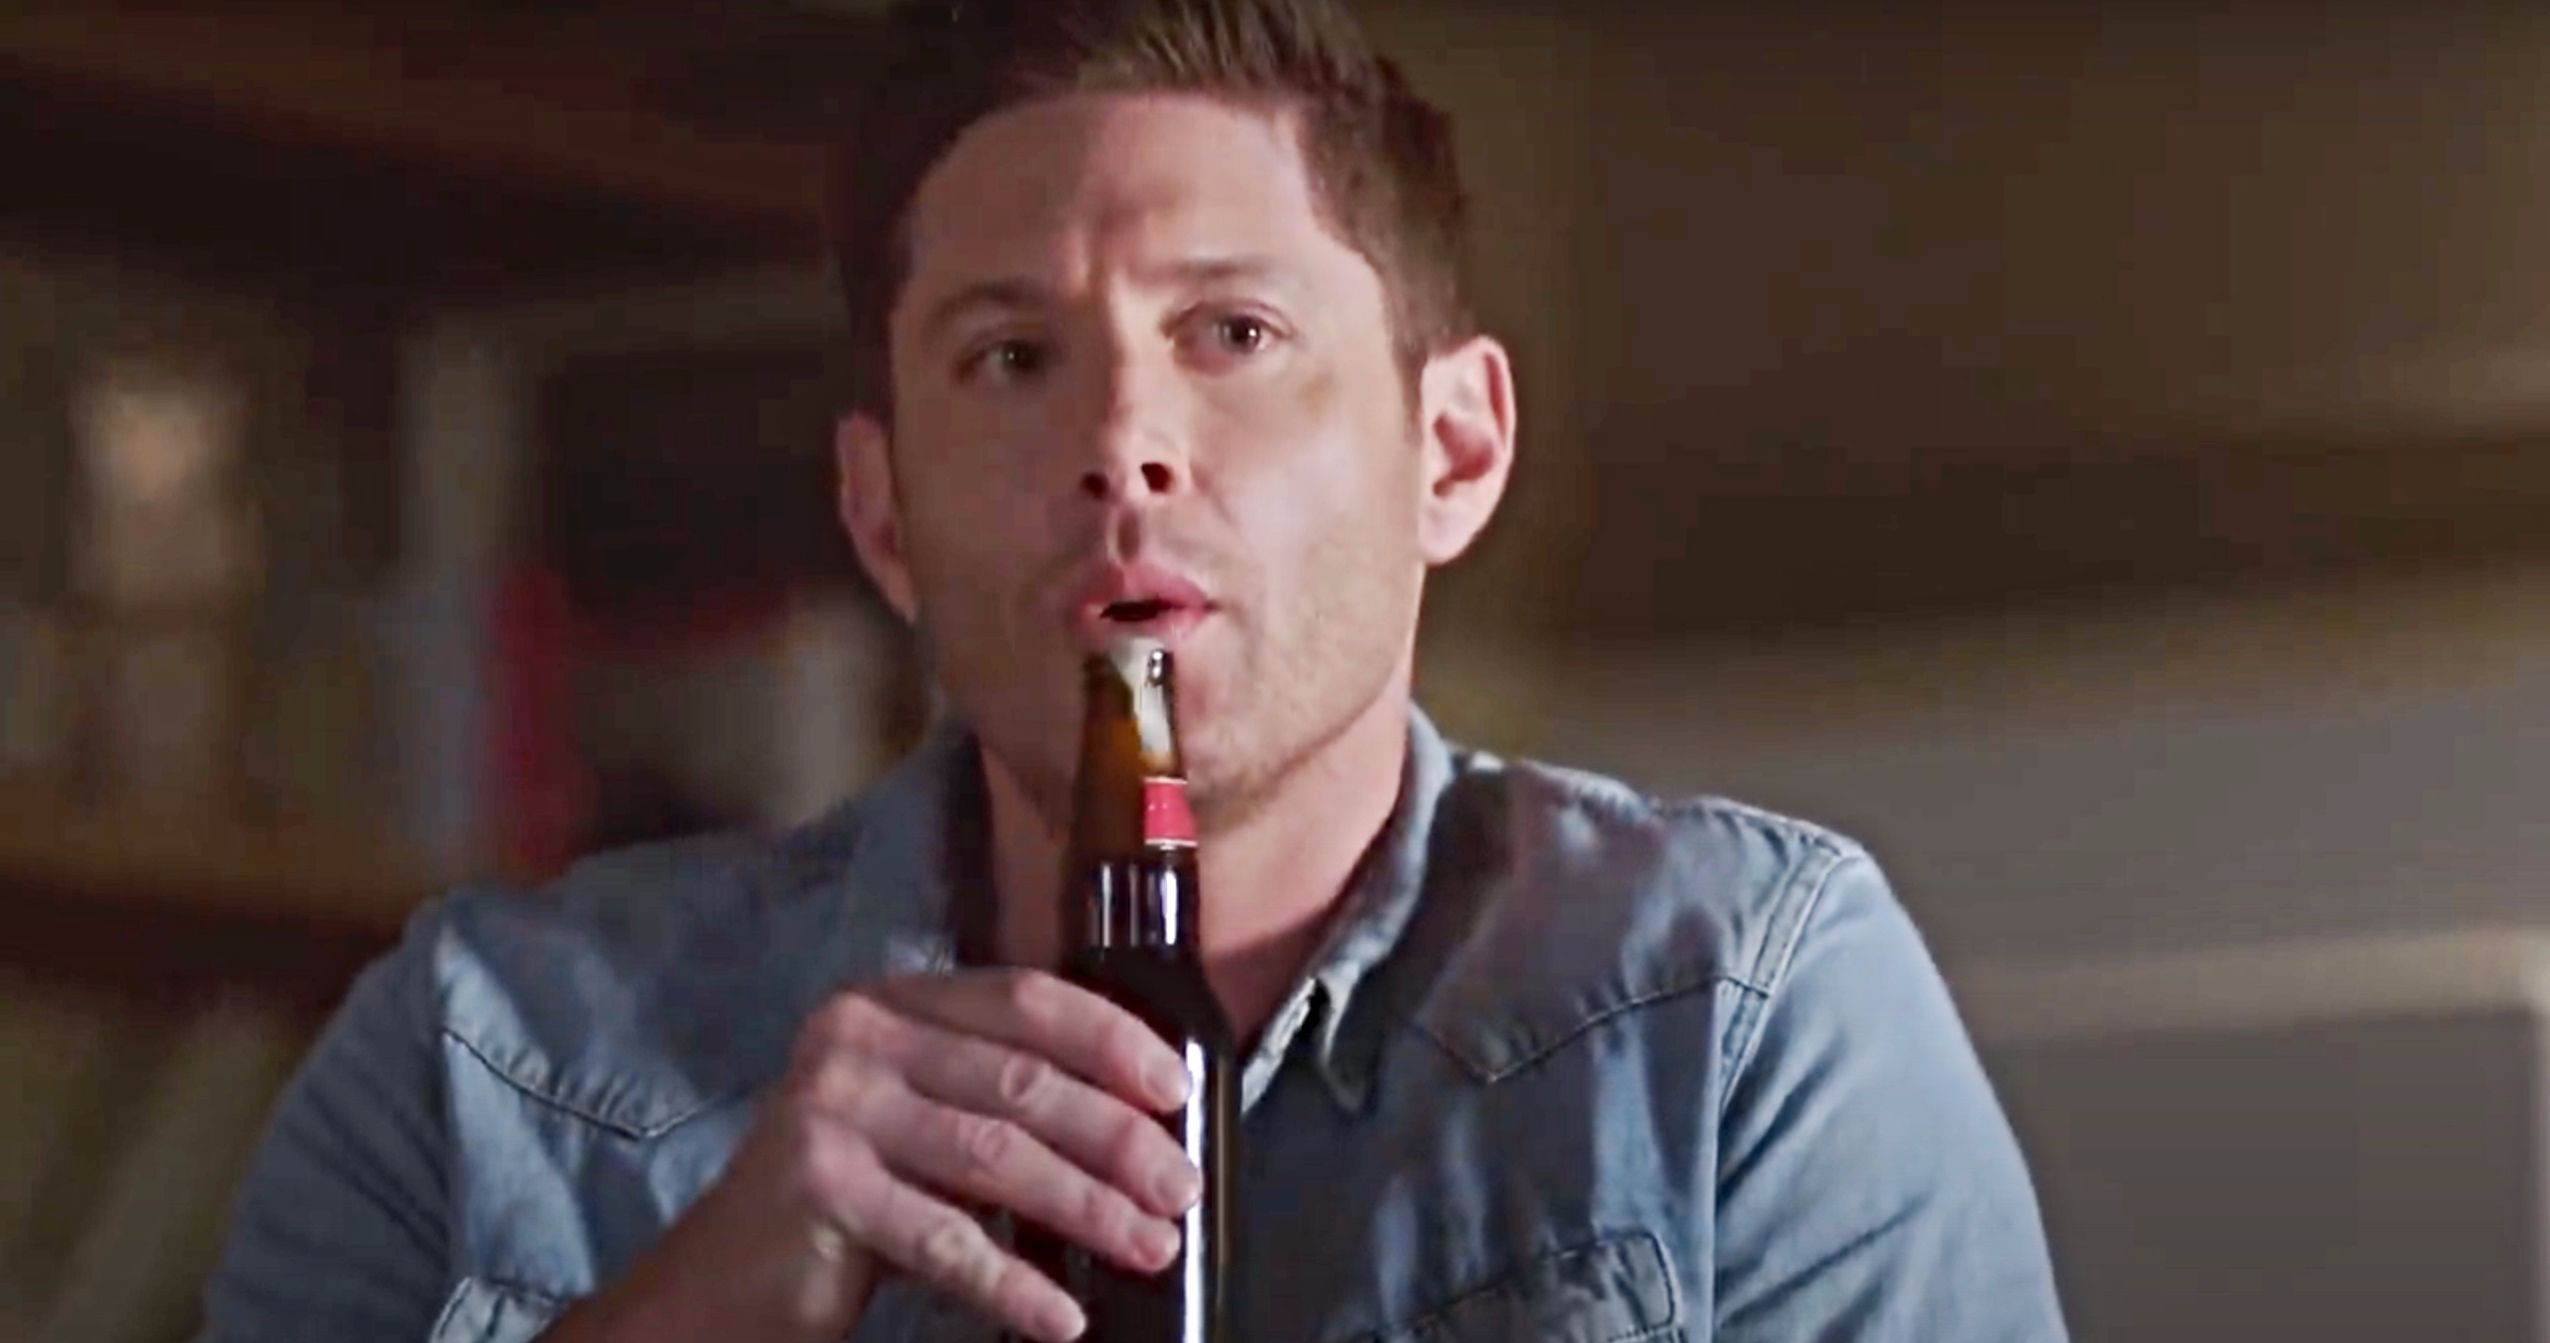 Supernatural Season 15 Bloopers Prove Jensen Ackles Can't Hold His Beer